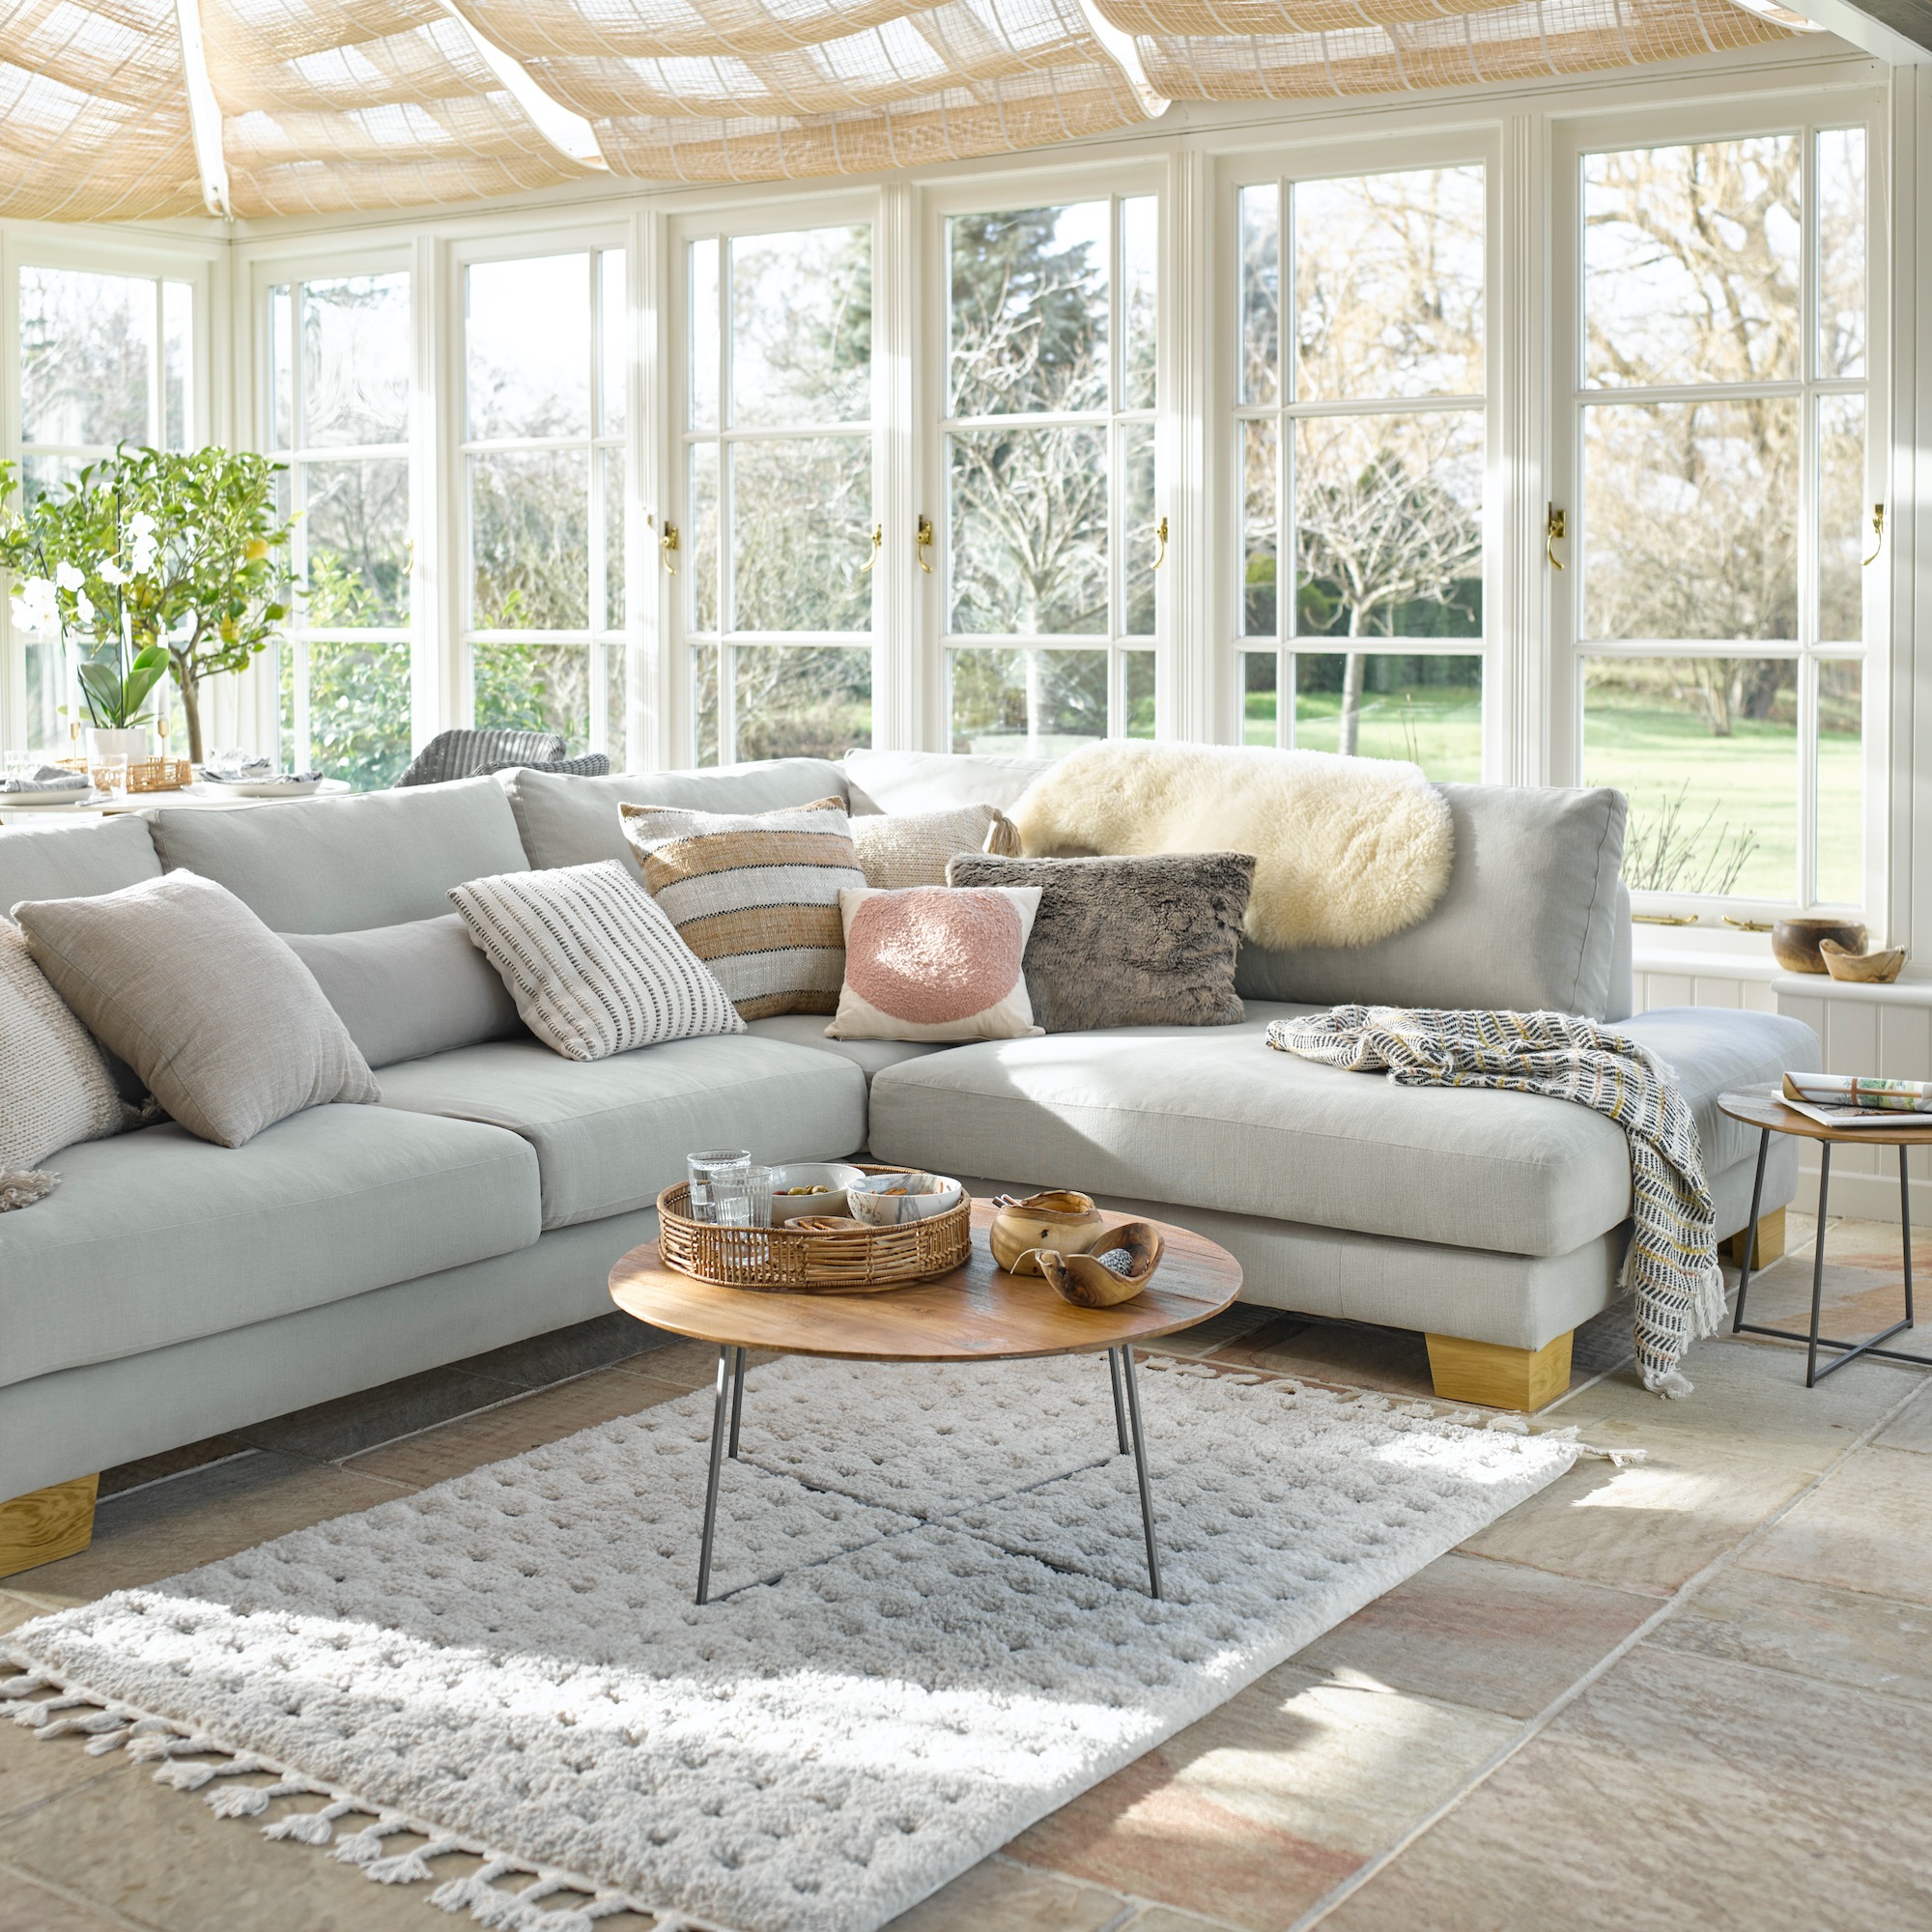 Garden room with ceiling blinds and grey-blue sofa